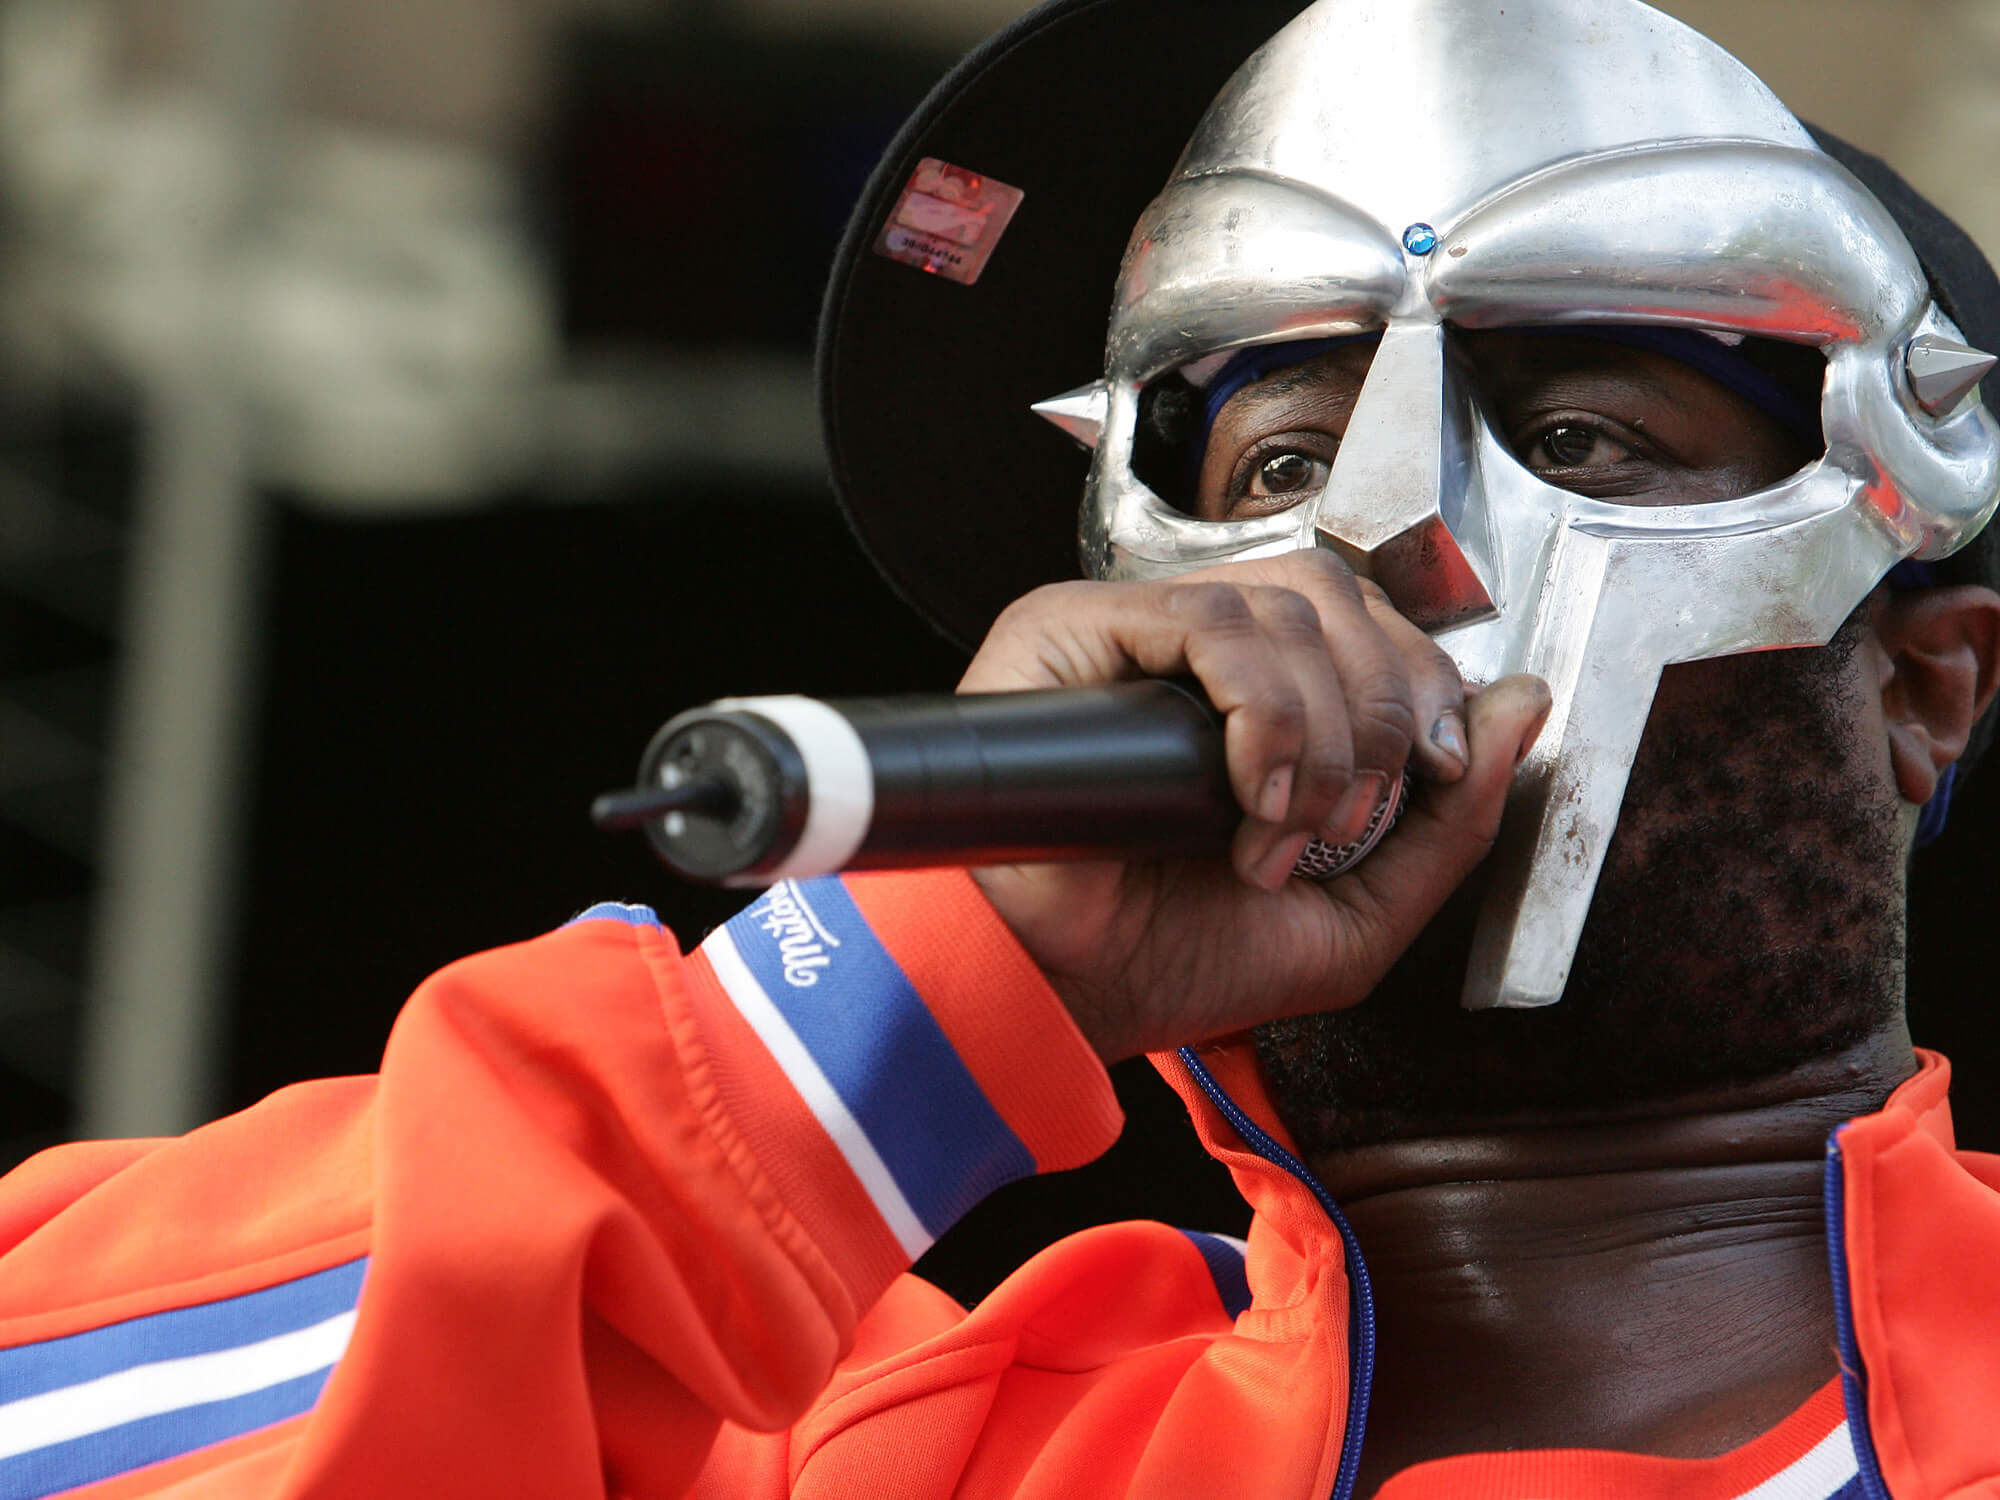 MF DOOM in his signature metal mask. He is on stage and is holding a mic.